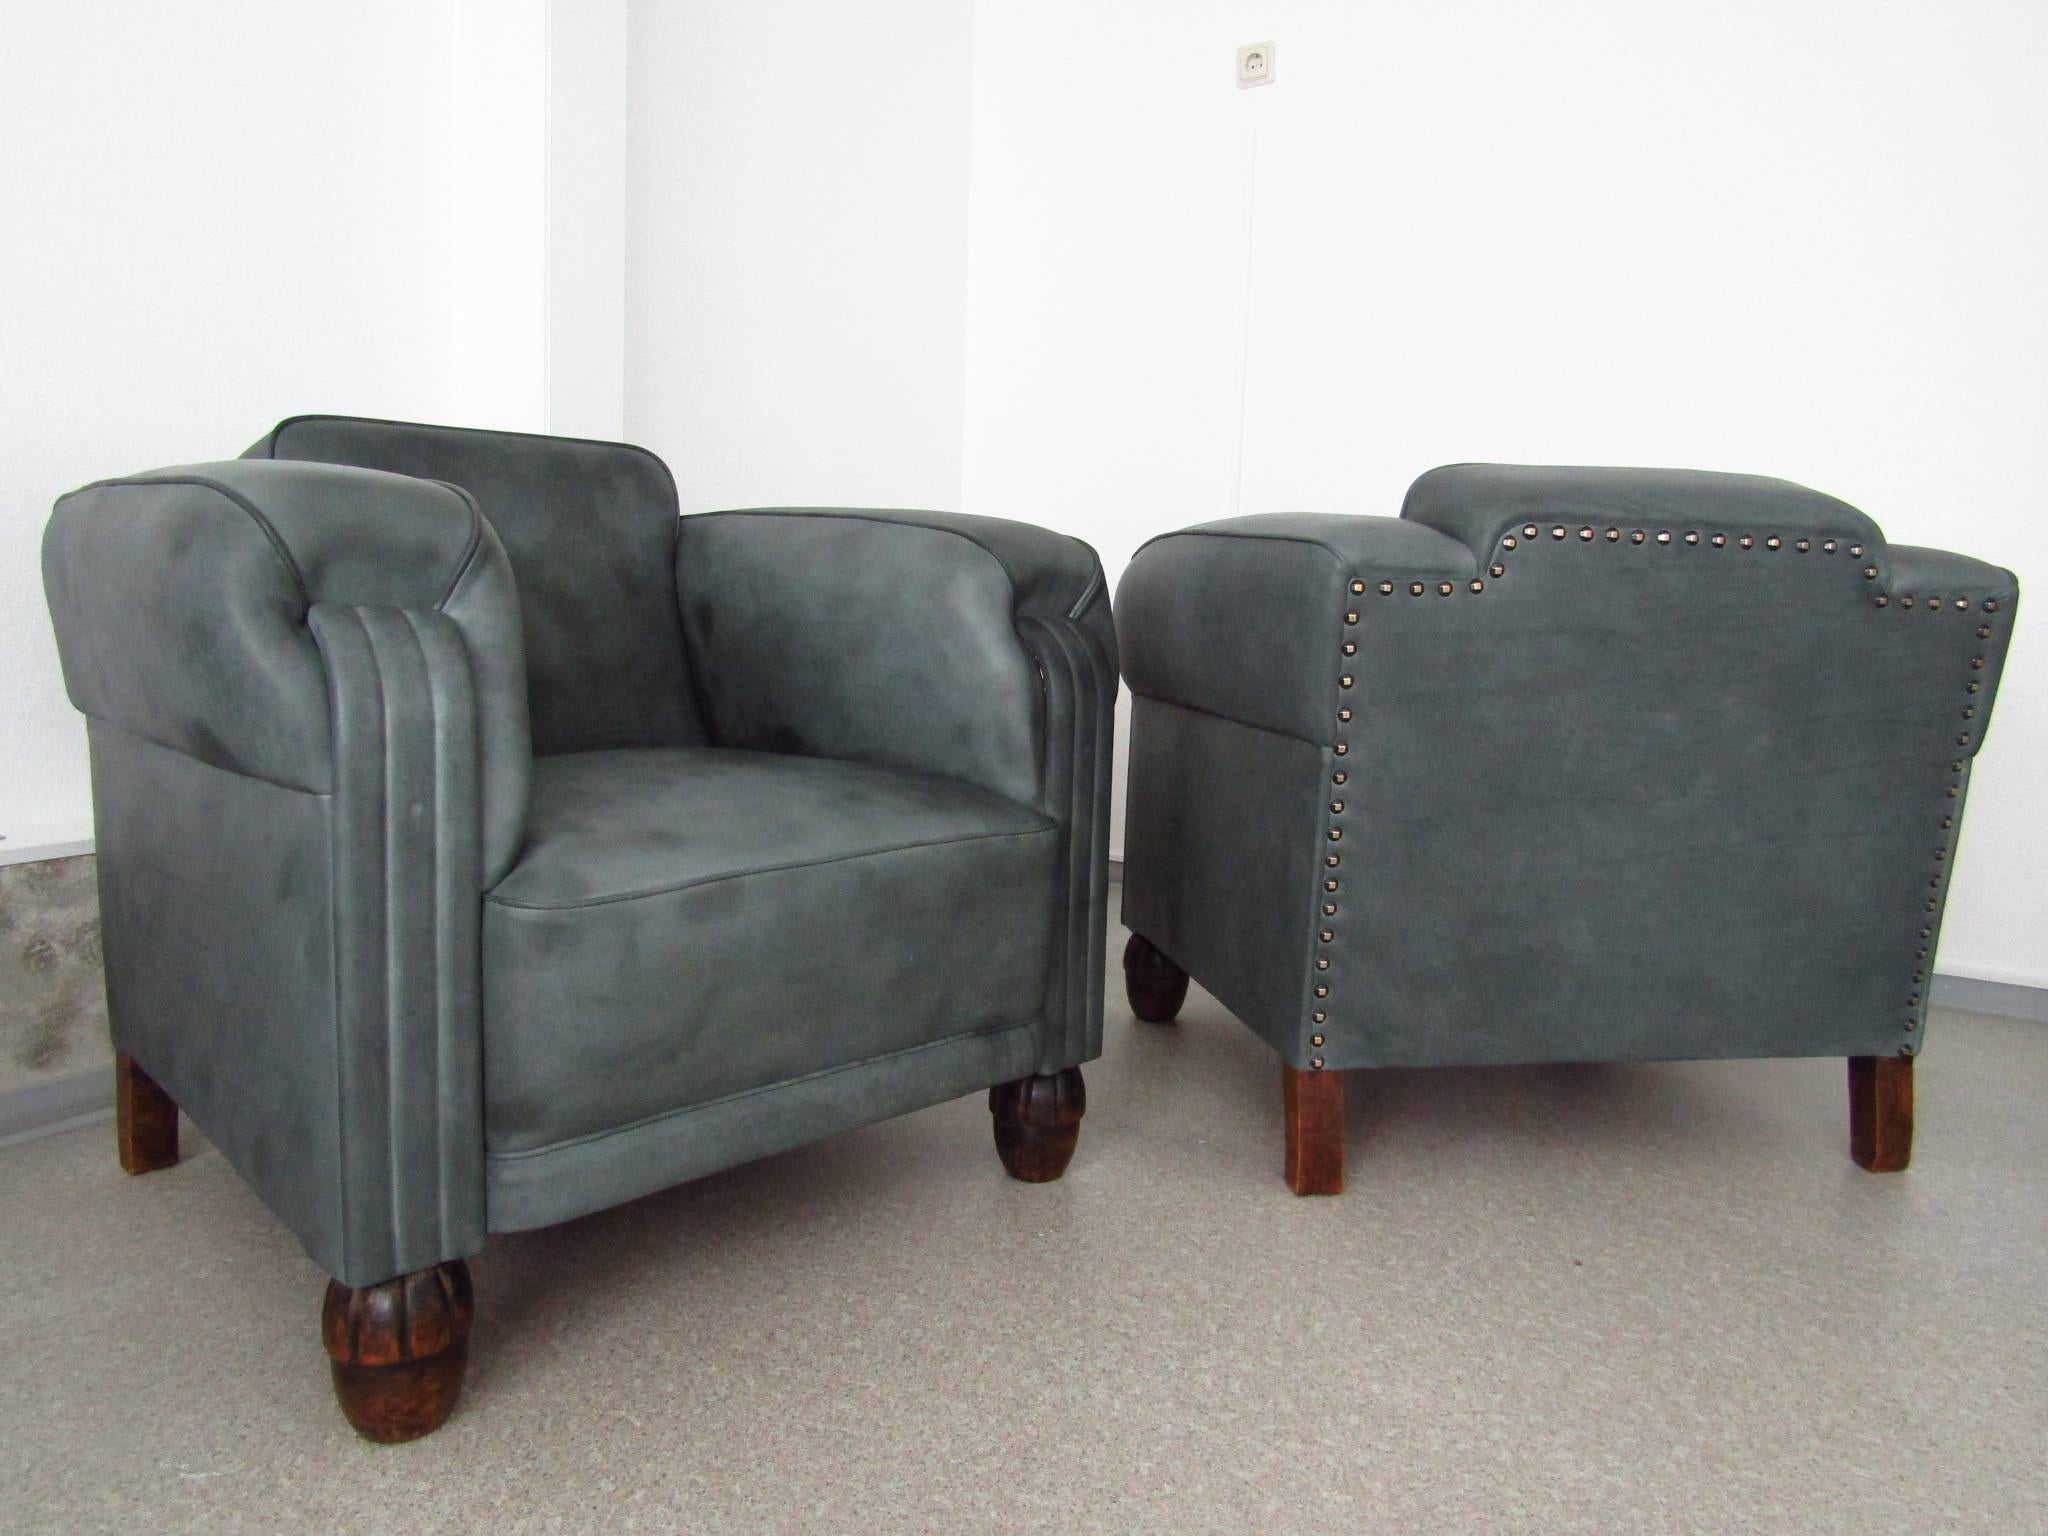 Pair of Art Deco Club Chairs Armchairs Leather, 1925 In Excellent Condition For Sale In Saarbruecken, DE